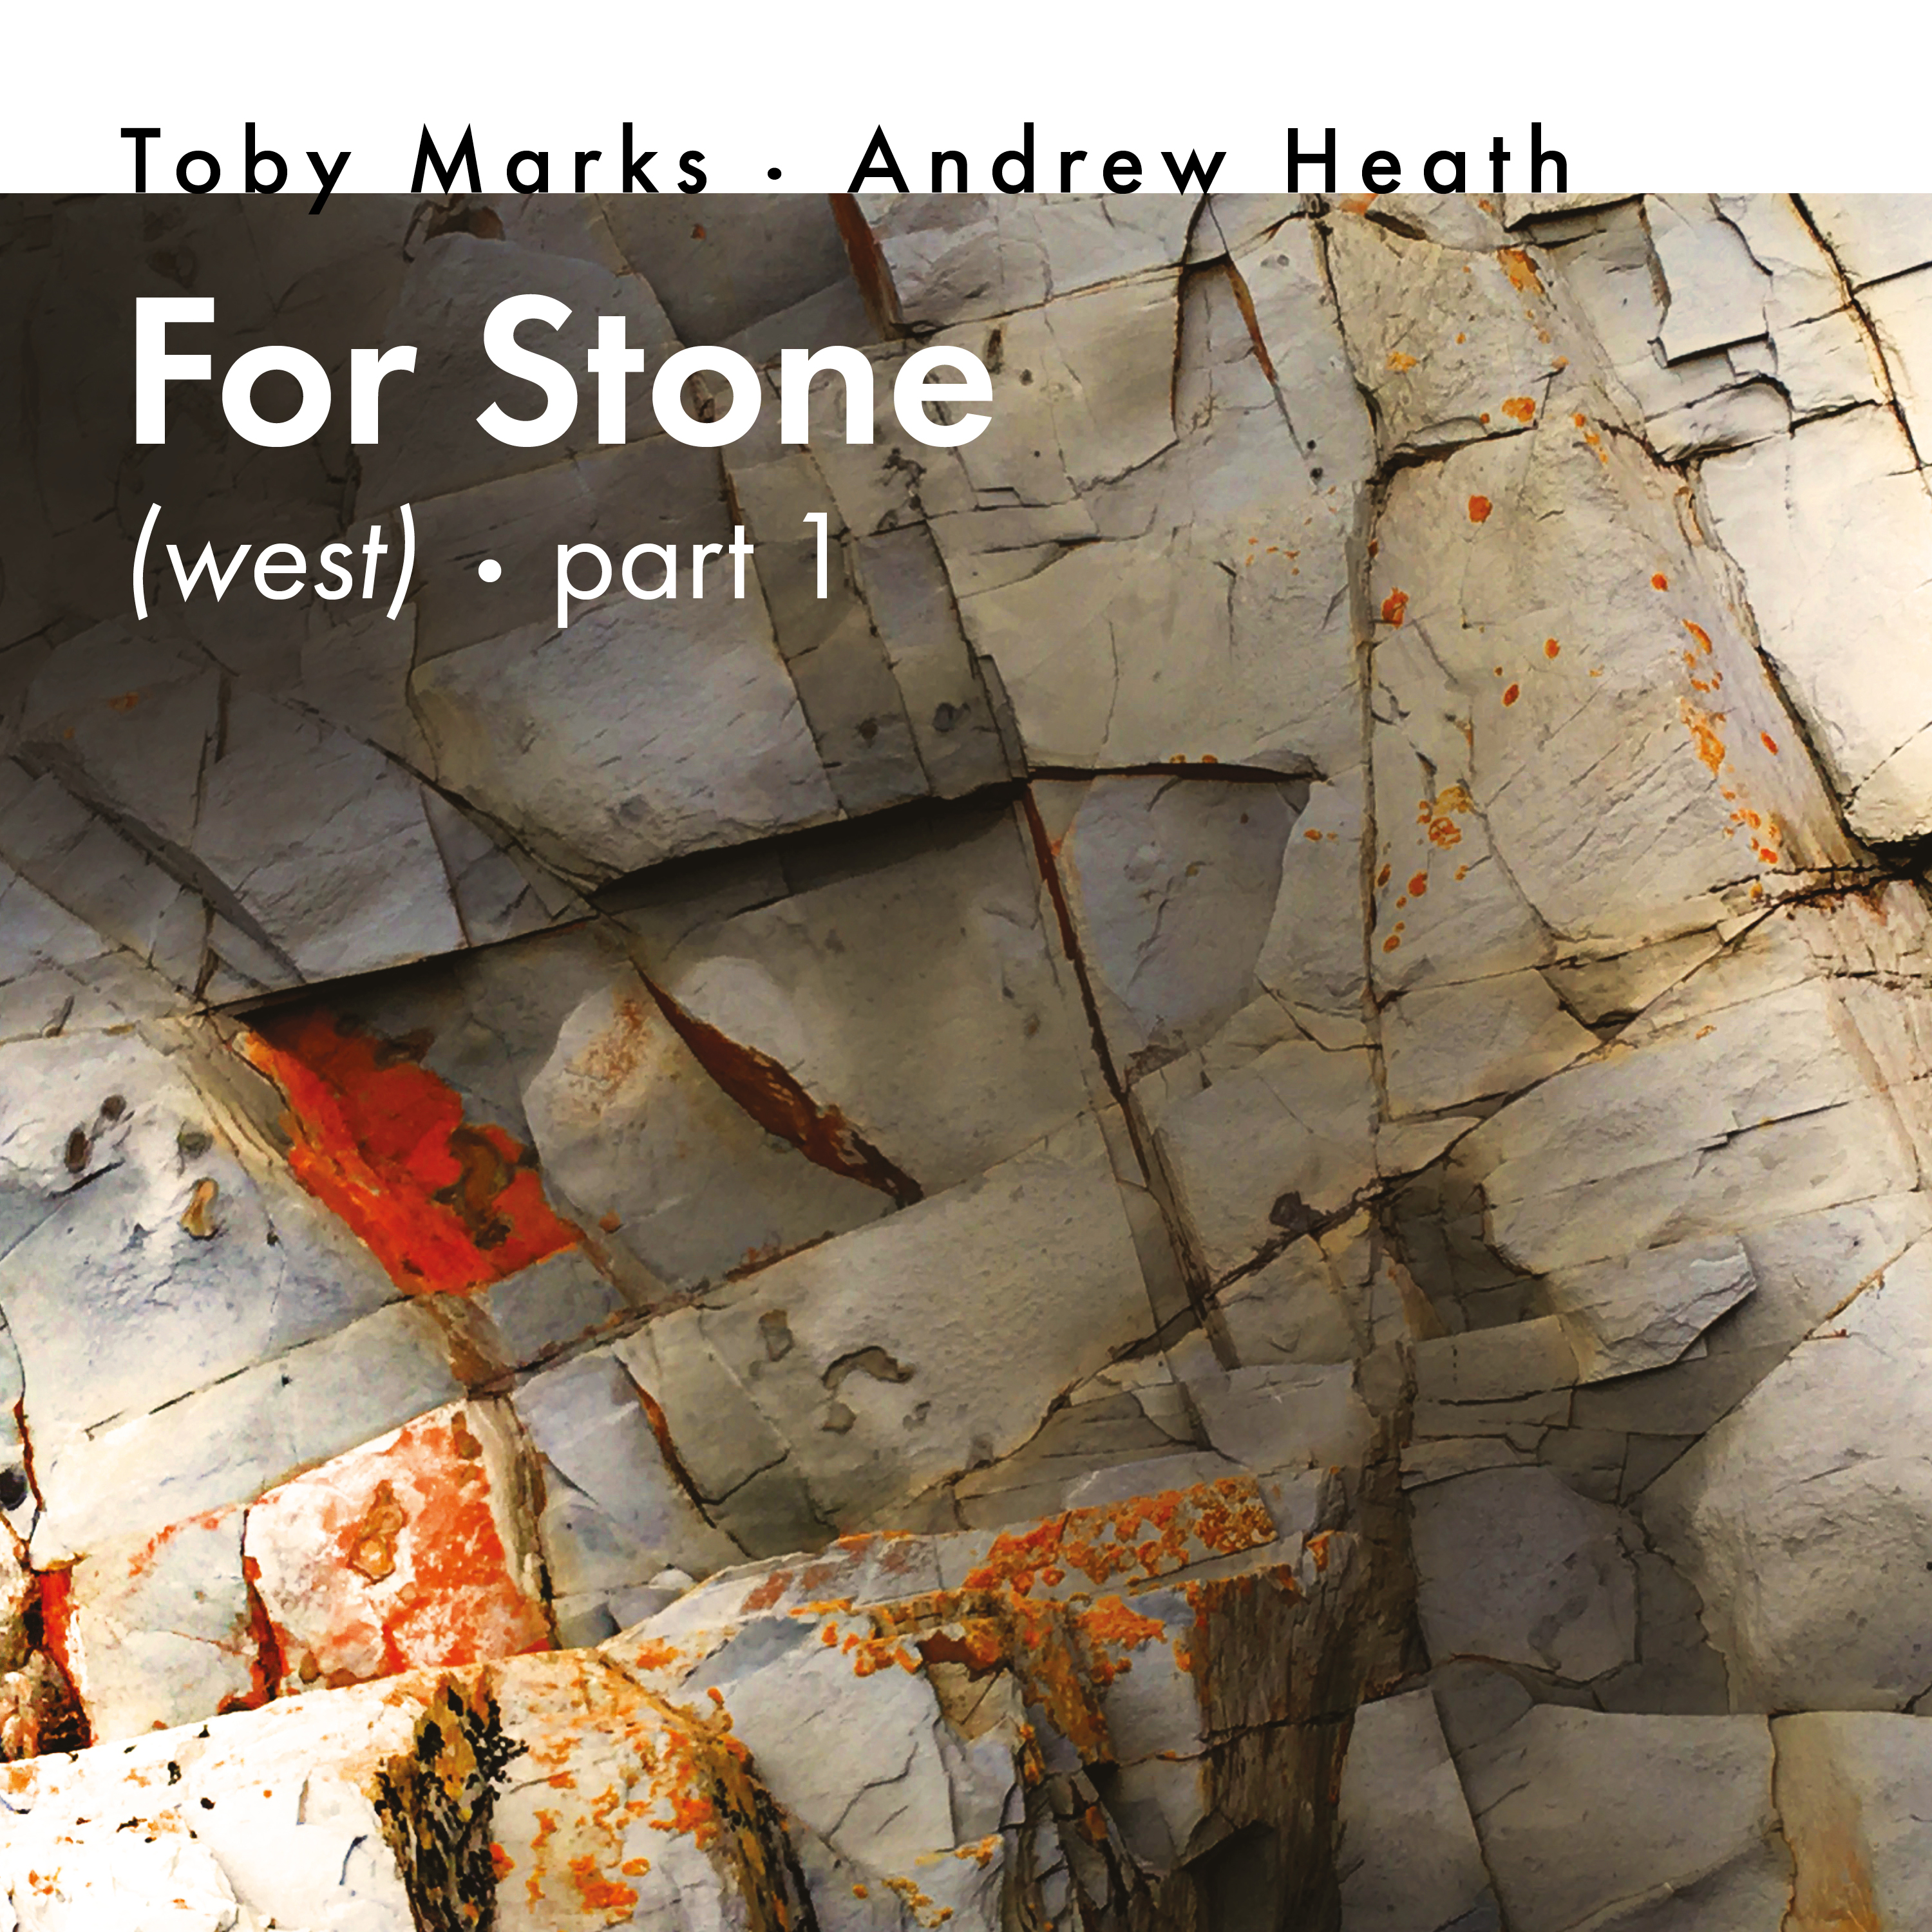 Toby Marks and Andrew Heath